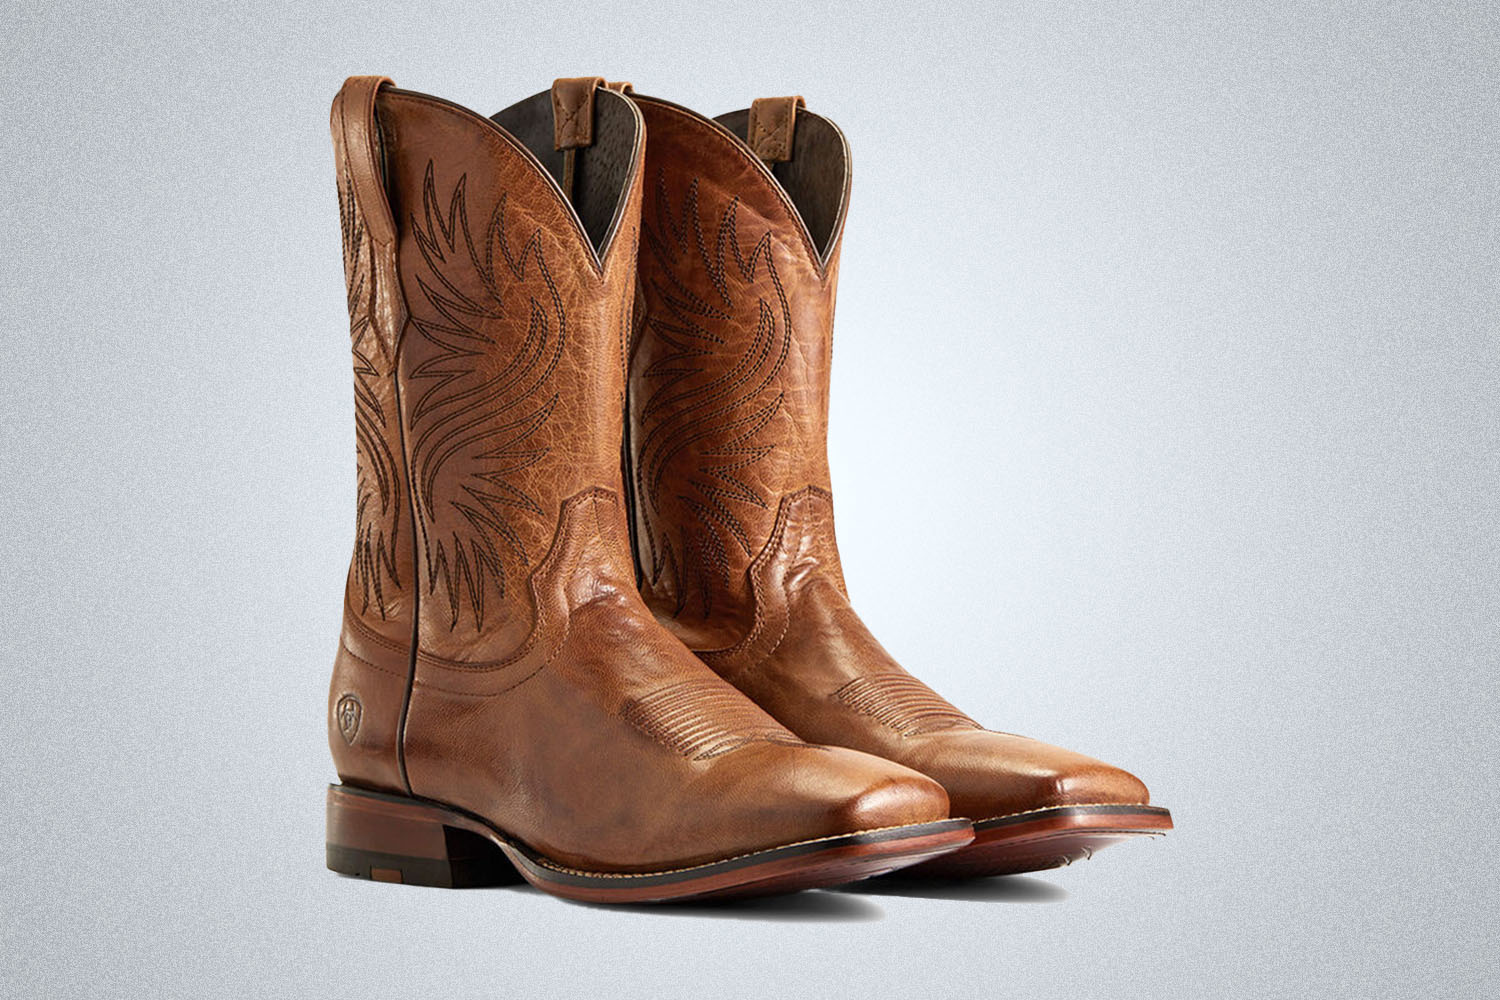 a pair of brown cowboy boots from Ariat on a grey background